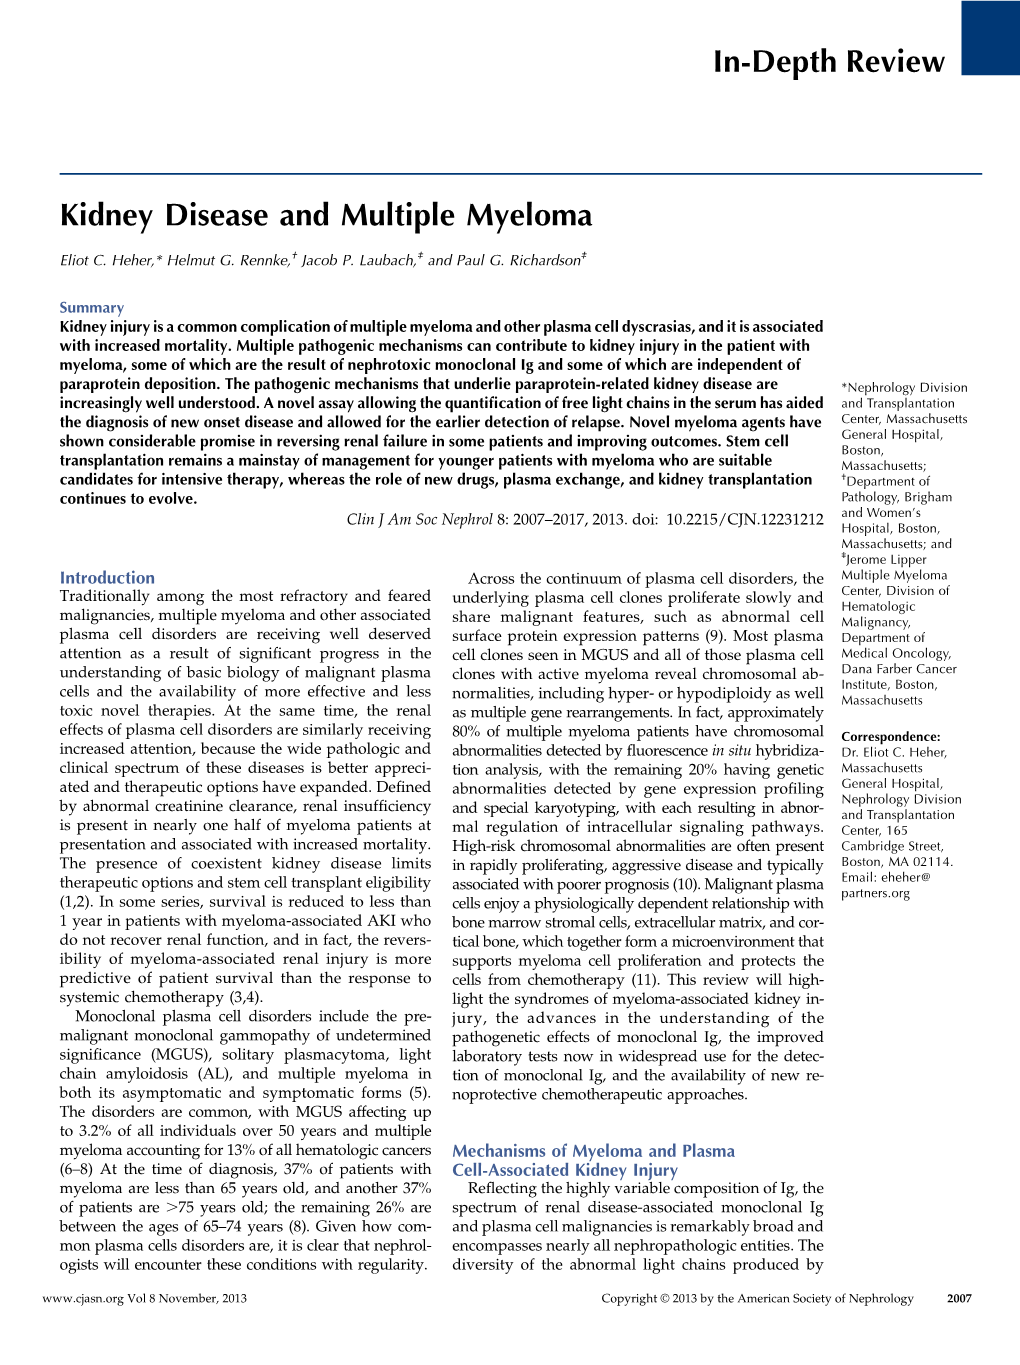 In-Depth Review Kidney Disease and Multiple Myeloma